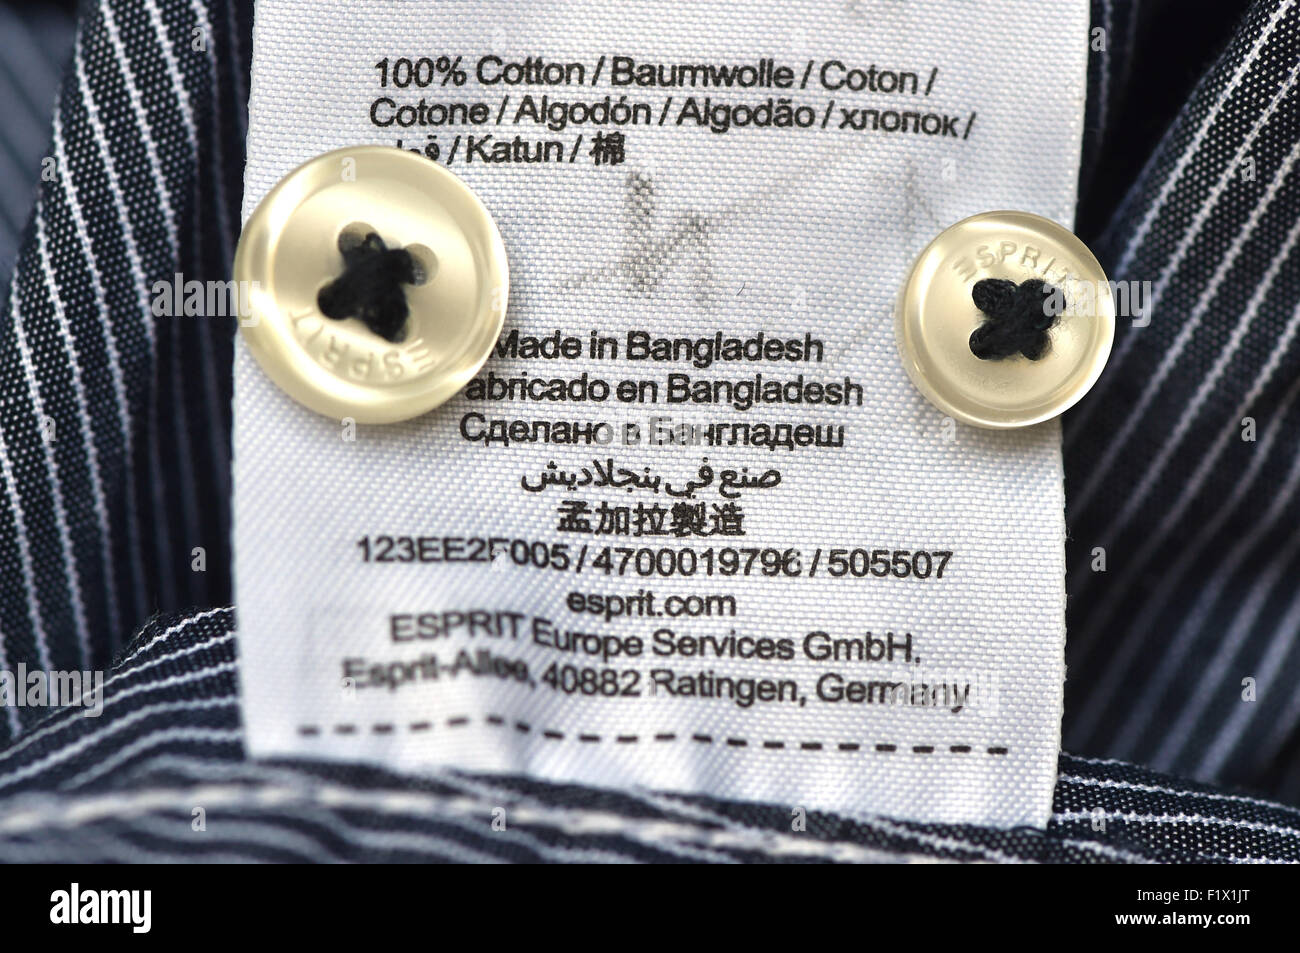 Berlin, Germany. 23rd Aug, 2015. An Esprit label in a garment which says "Made  in Bangladesh" in Berlin, Germany, 23 August 2015. Photo: Jens  Kalaene/dpa/Alamy Live News Stock Photo - Alamy